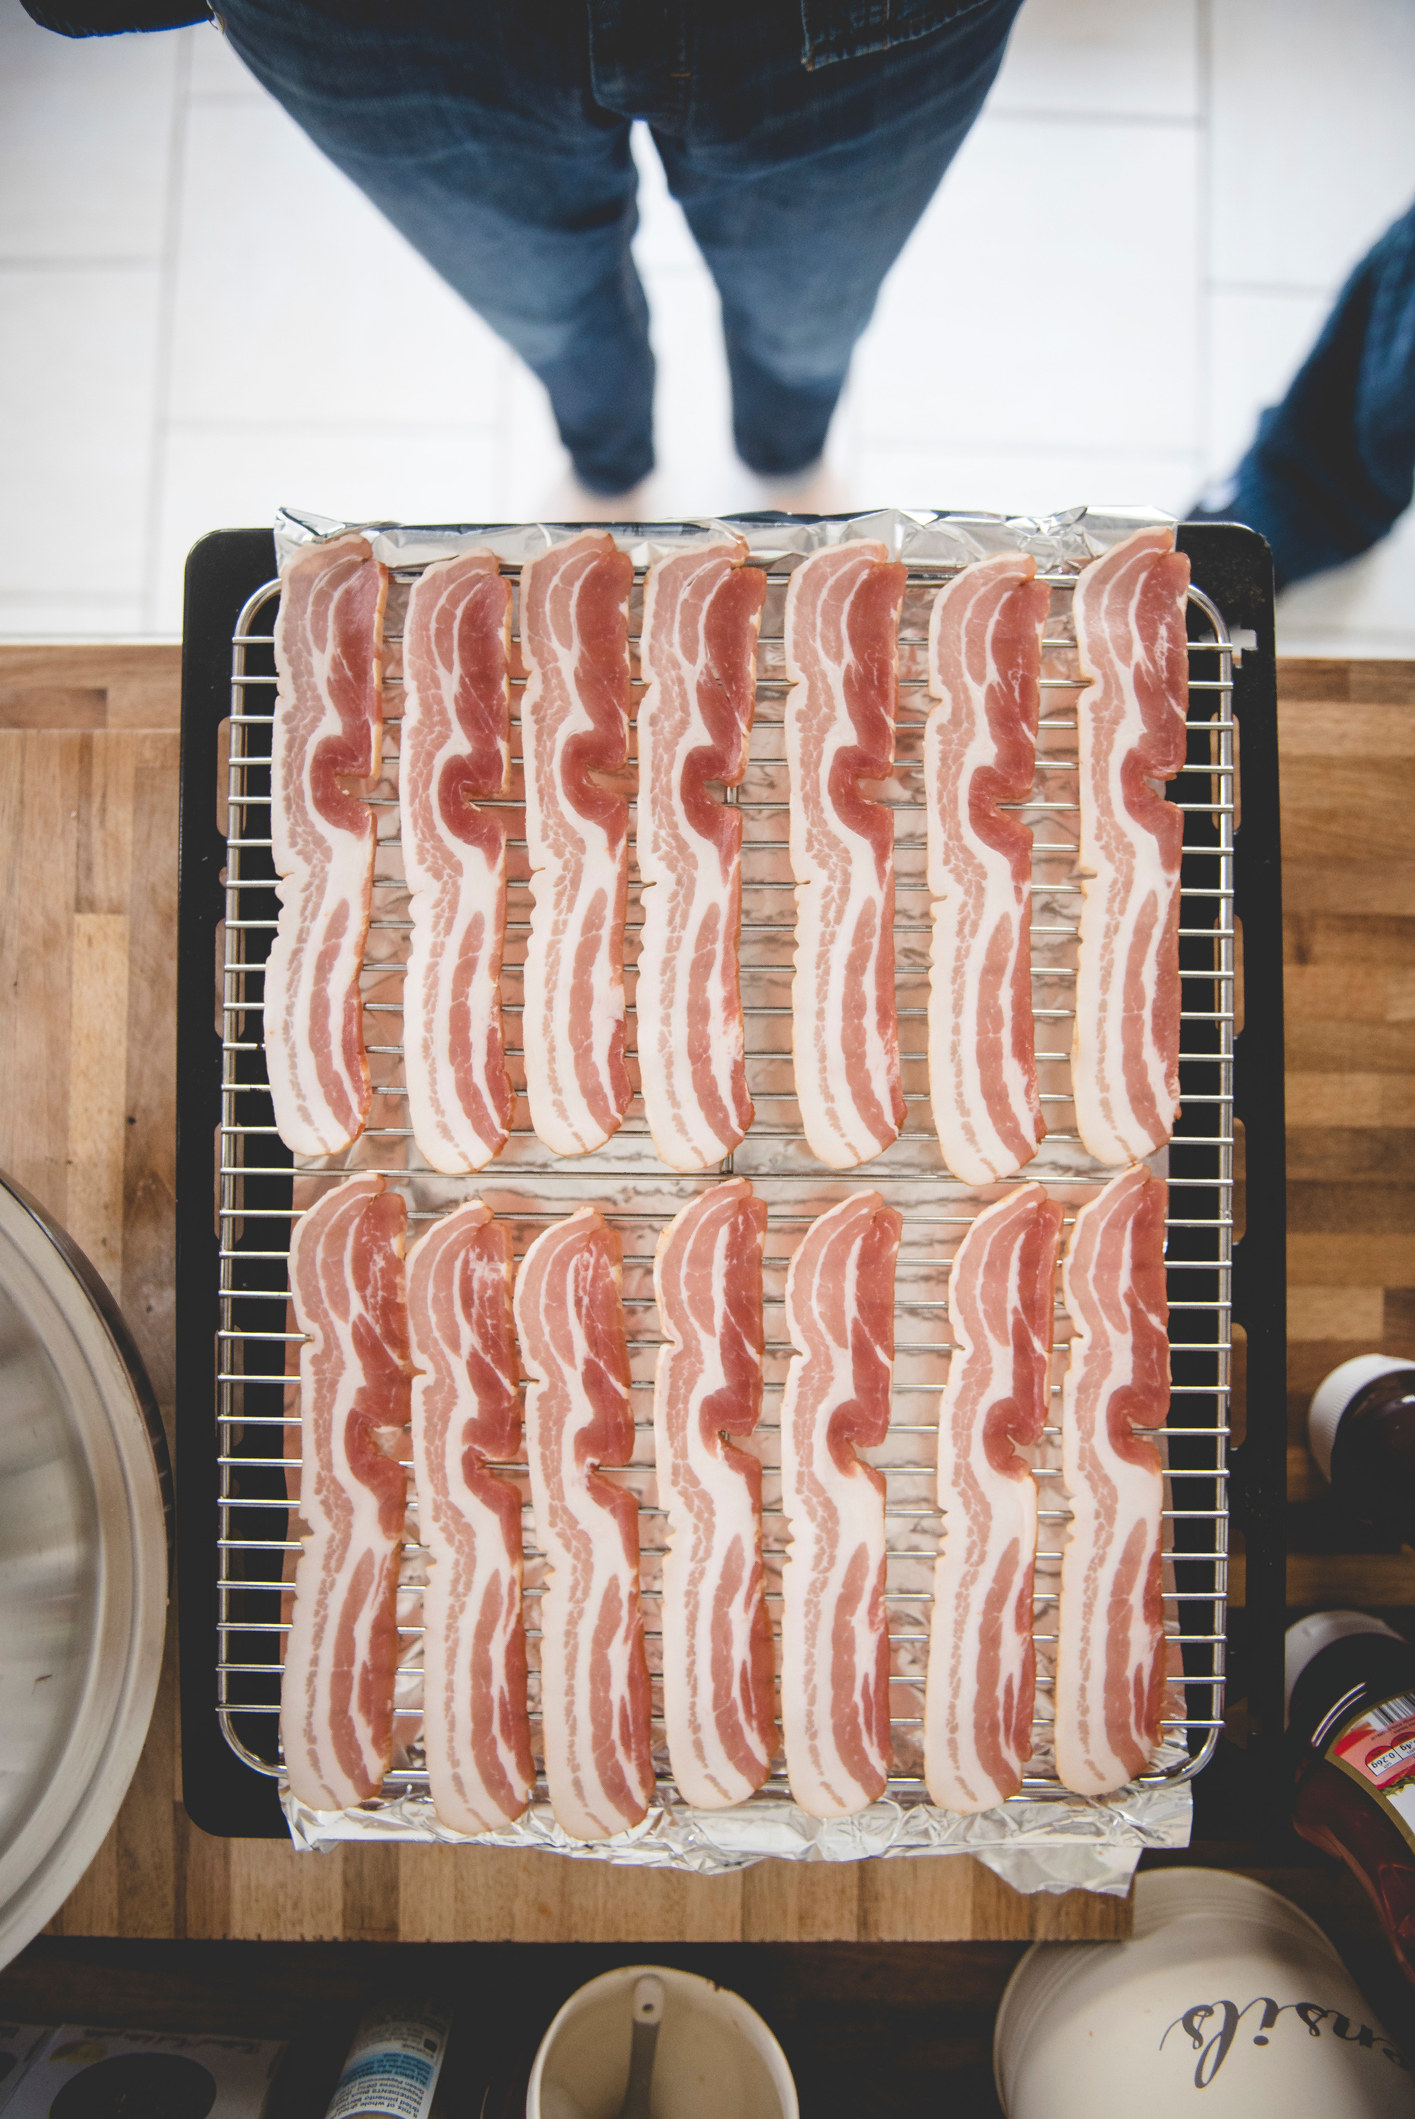 Bacon on a wire rack